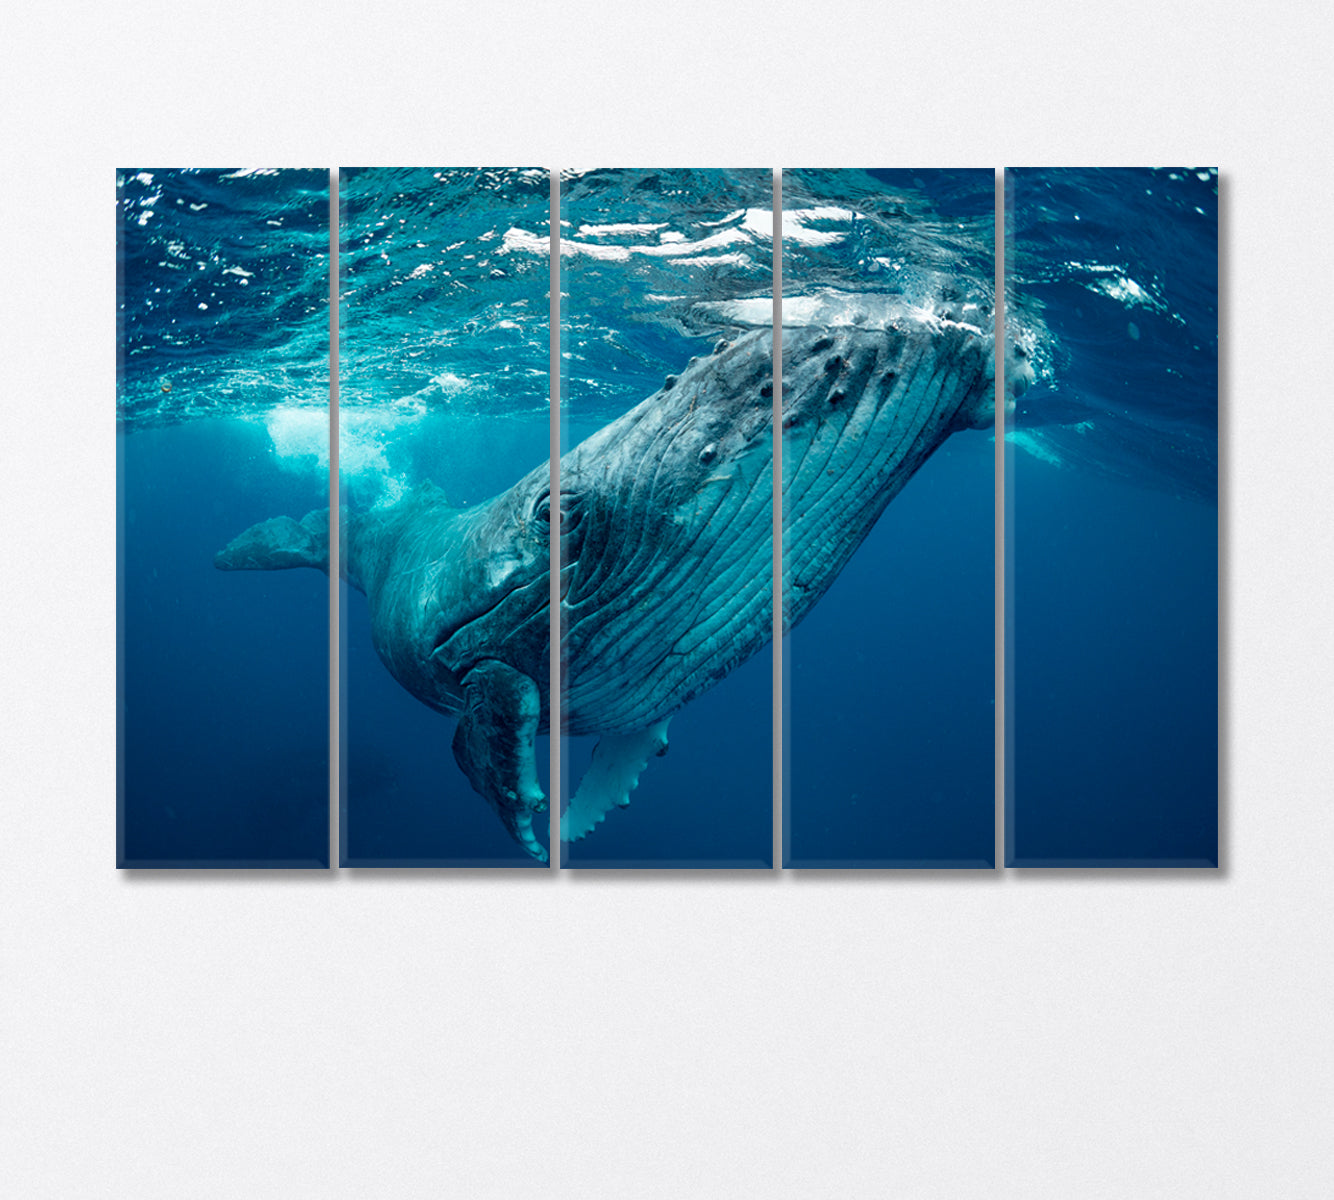 Whale Swimming in the Pacific Ocean Canvas Print-Canvas Print-CetArt-5 Panels-36x24 inches-CetArt